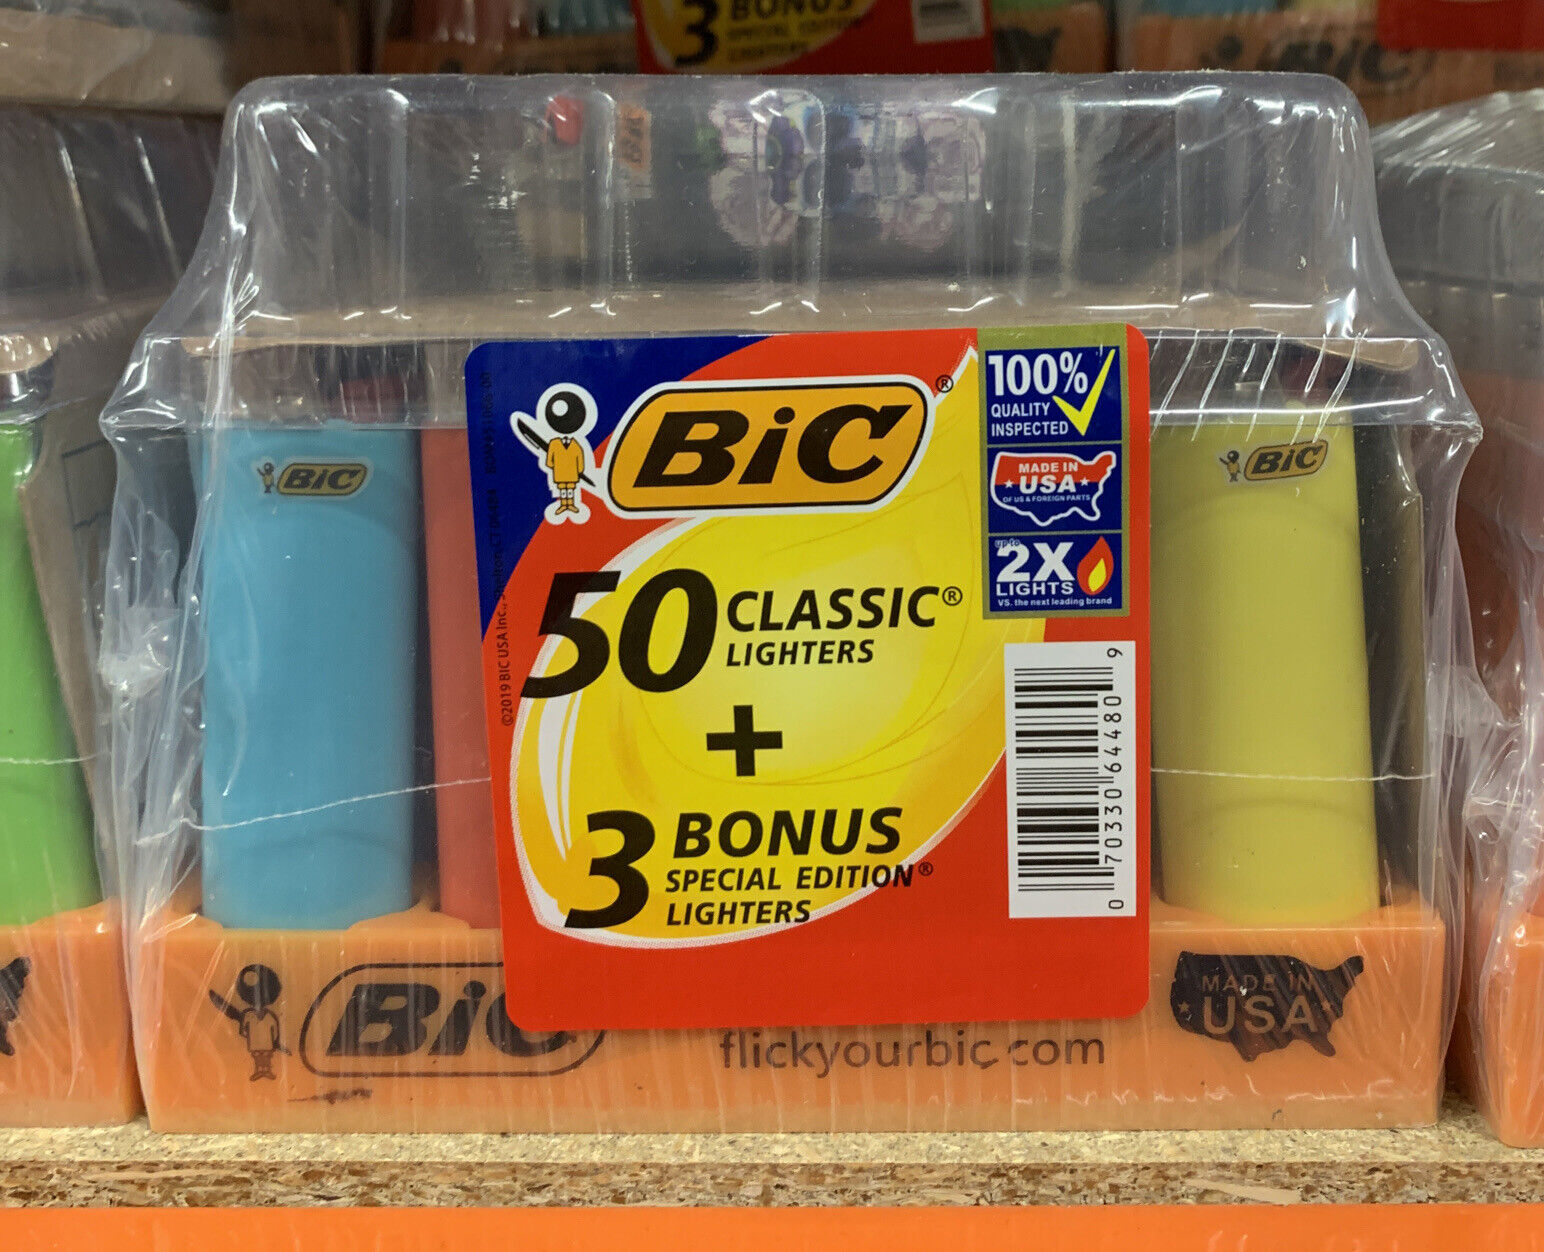 BIC Classic Lighter Assorted Colors 50 Count Tray + 3 Special Lighters